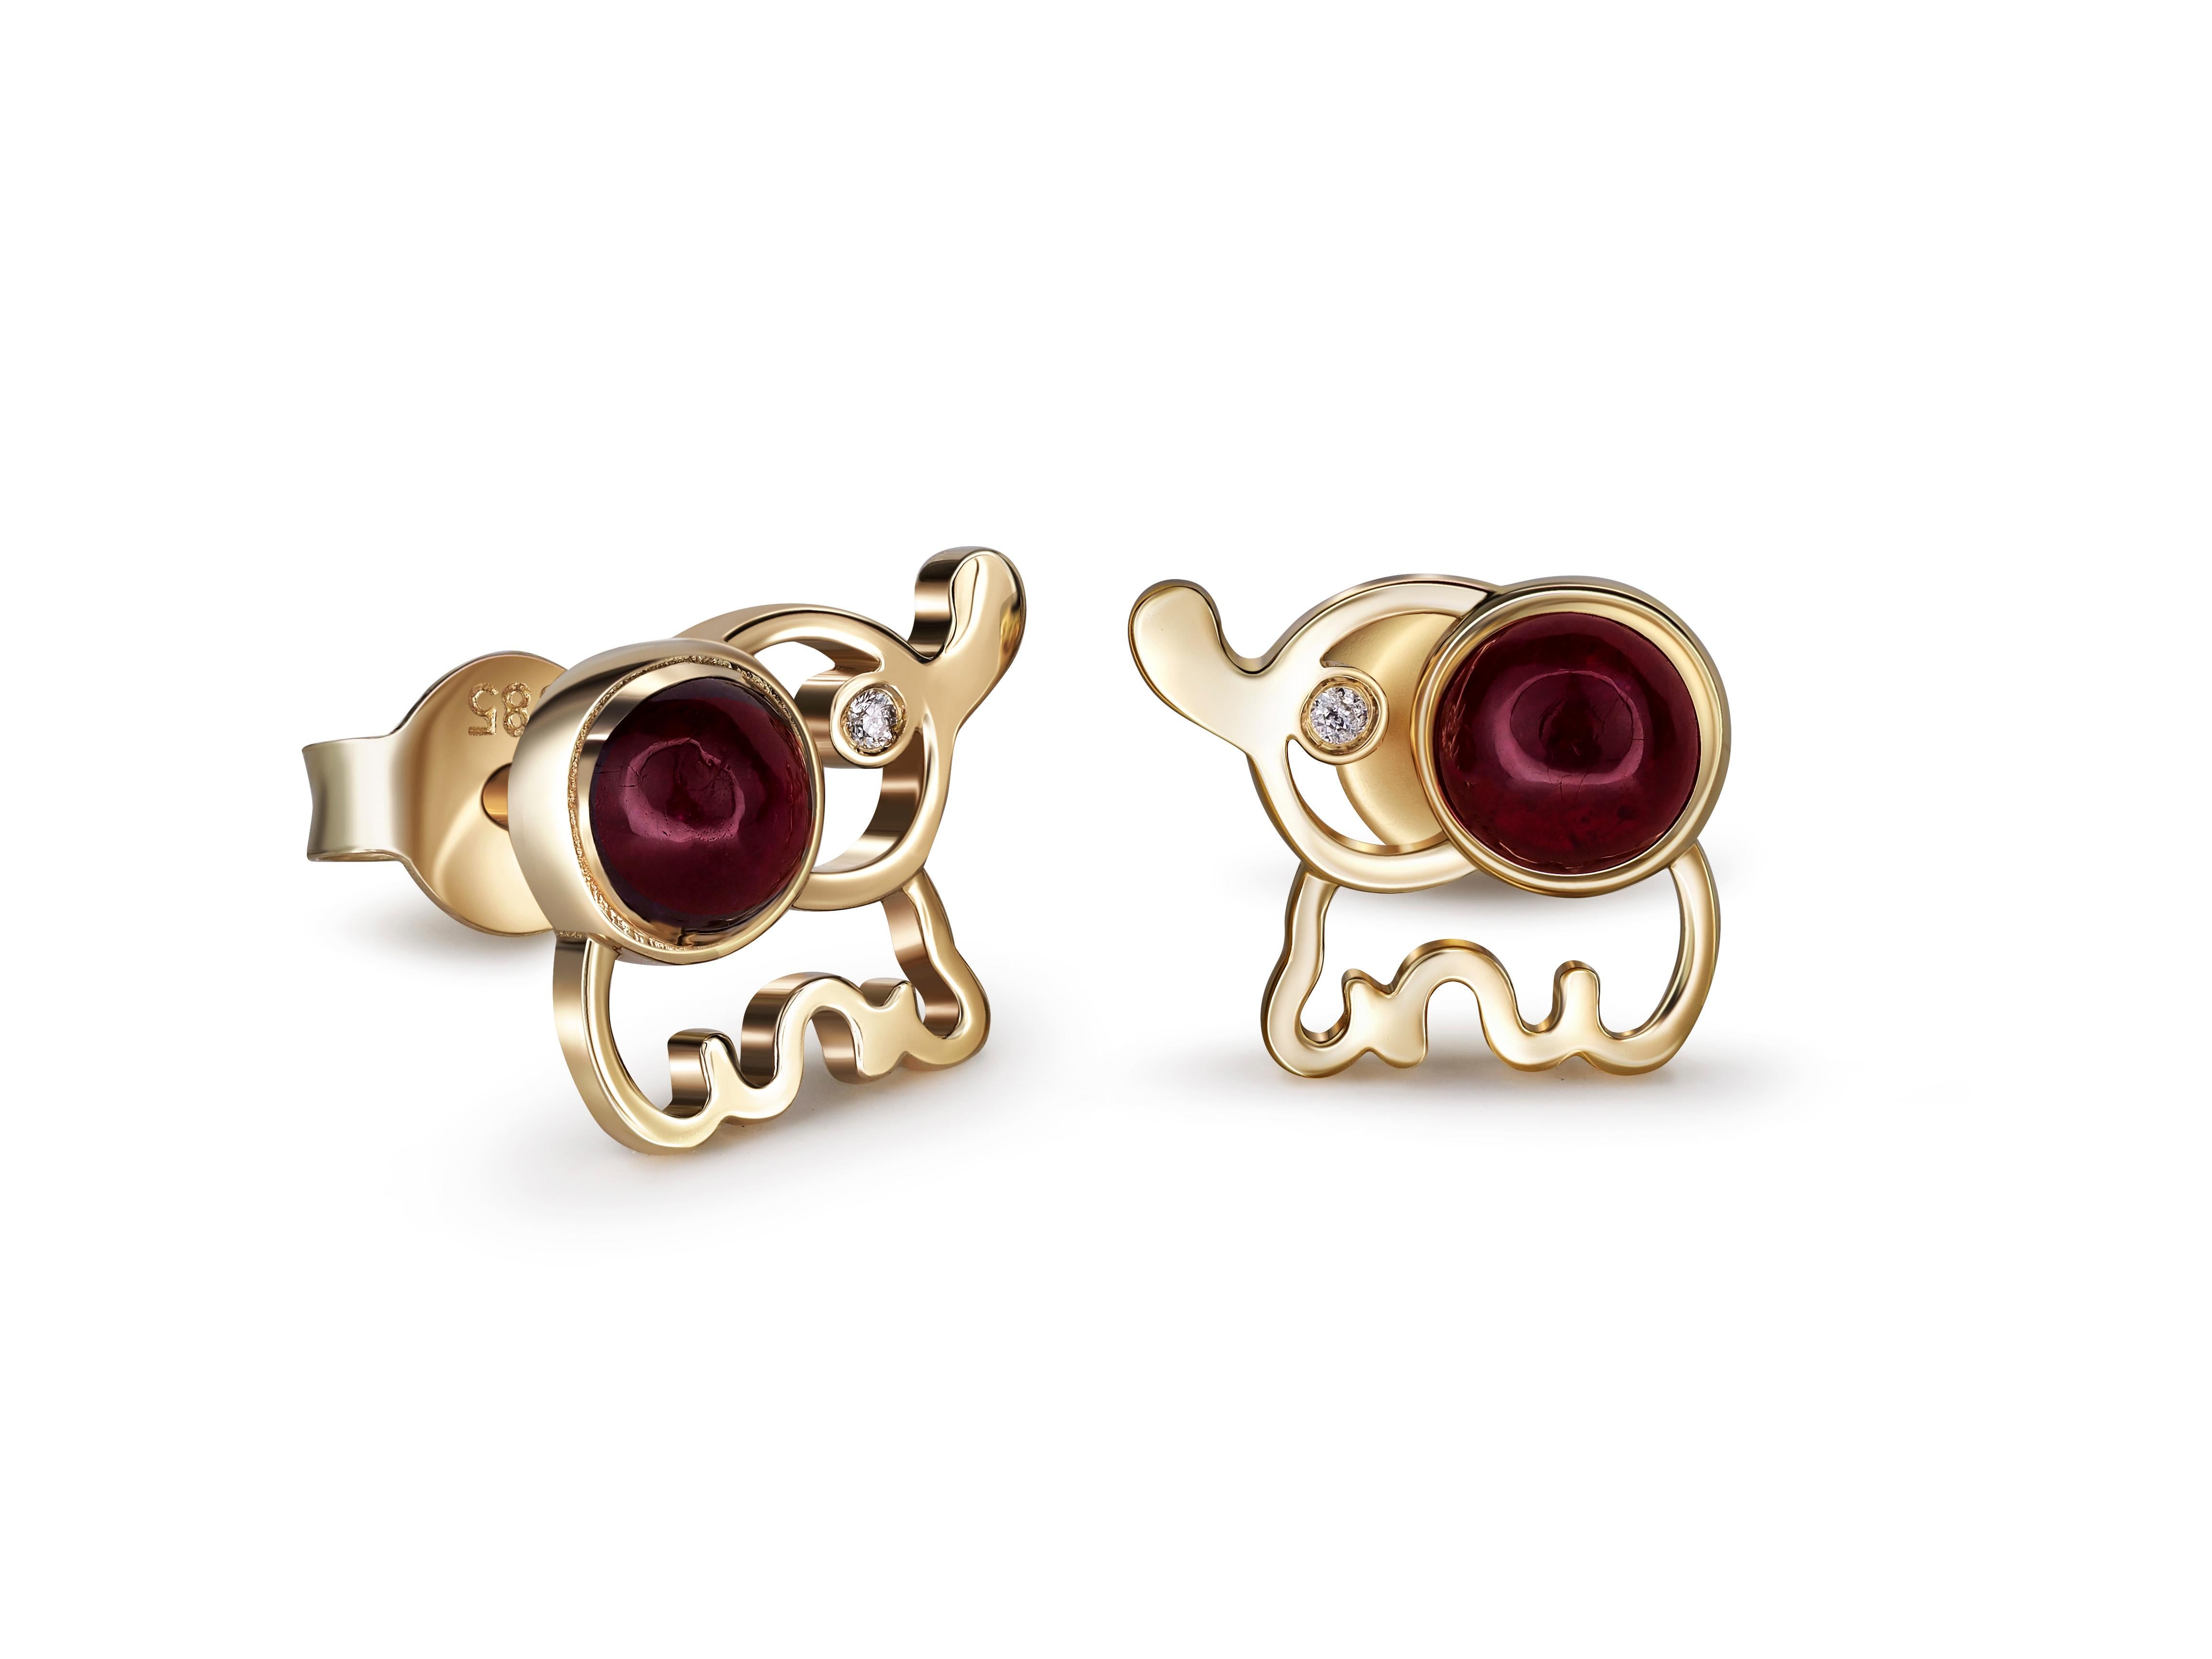 14 kt solid gold elephant earrings studs with natural ruby cabochons. Ruby birthstone.
Total weight: 2.2 g.
Size: 7 x 8 mm.
Central stones: Natural rubies - 2 pieces
Weight: approx 0.85 ct total (4 mm each), cut - round cabochon
Color: deep